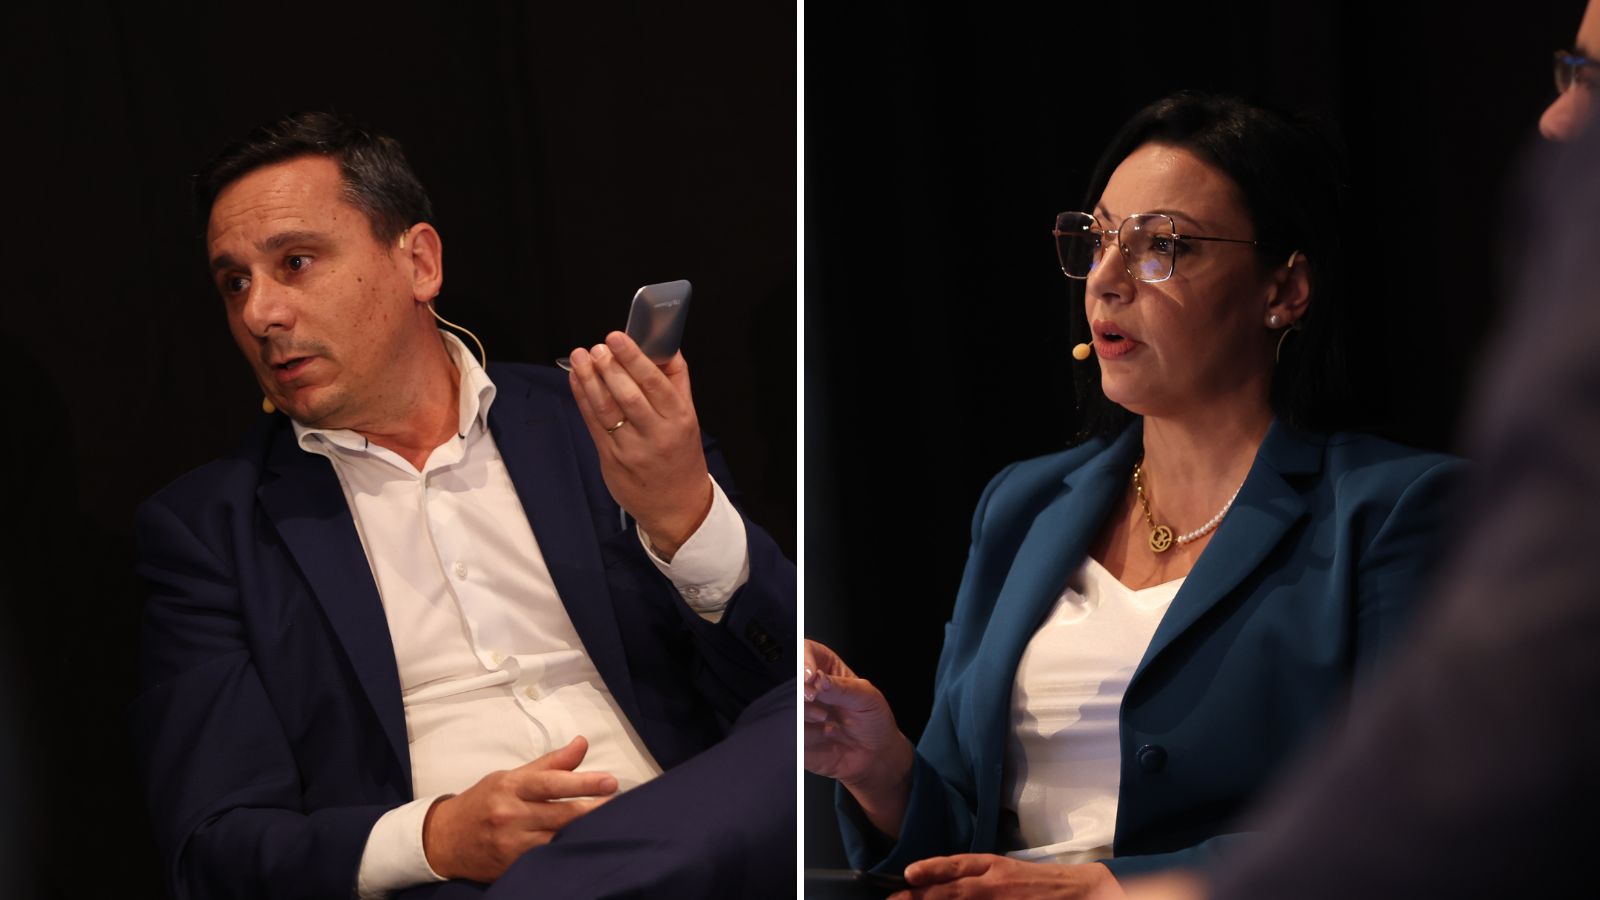 The Malta Chamber Deputy President and CEO discuss national priorities during IFSP Annual Conference